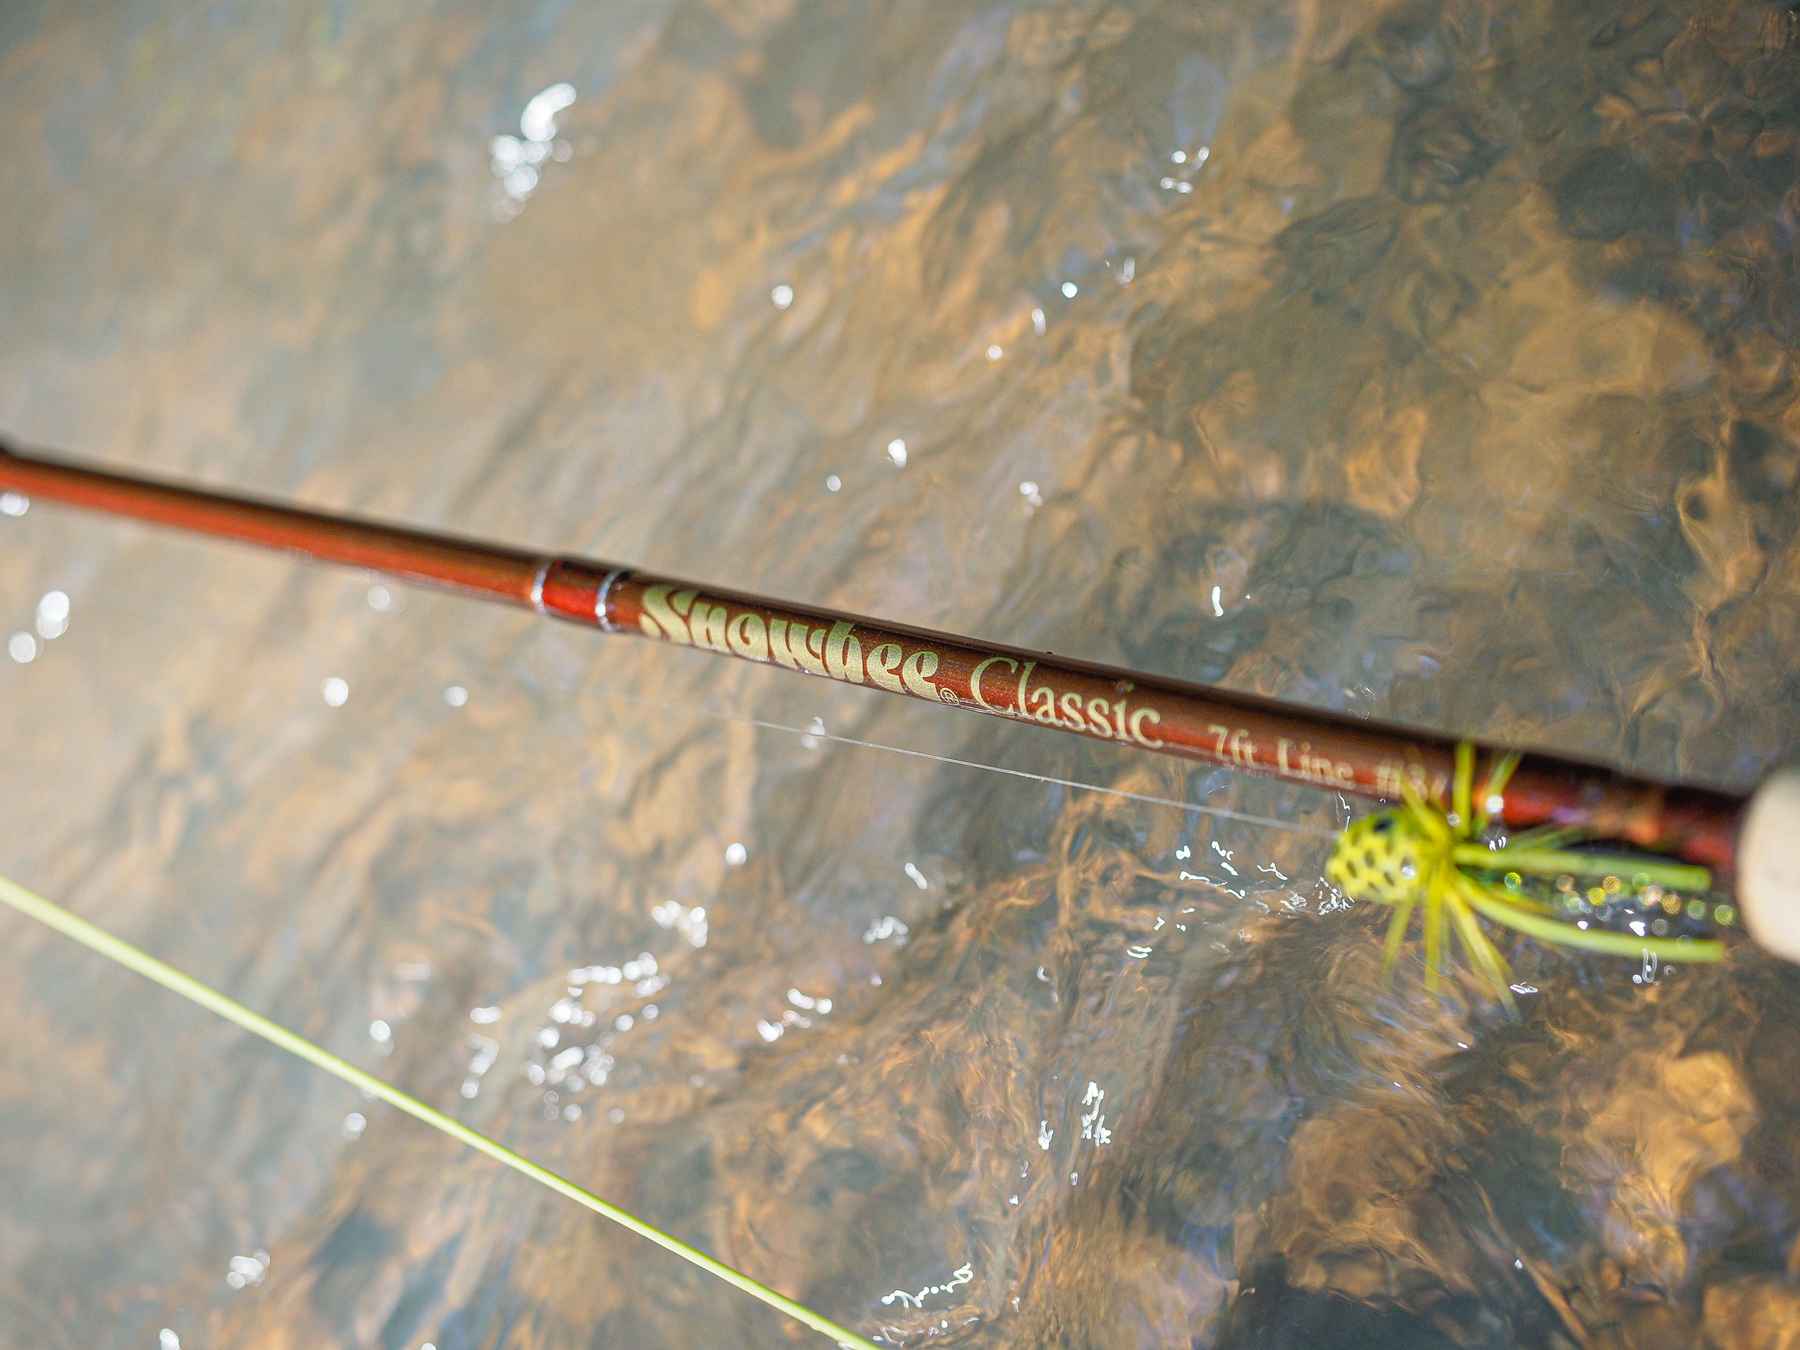 Review: Snowbee Classic fly rod  Hatch Magazine - Fly Fishing, etc.